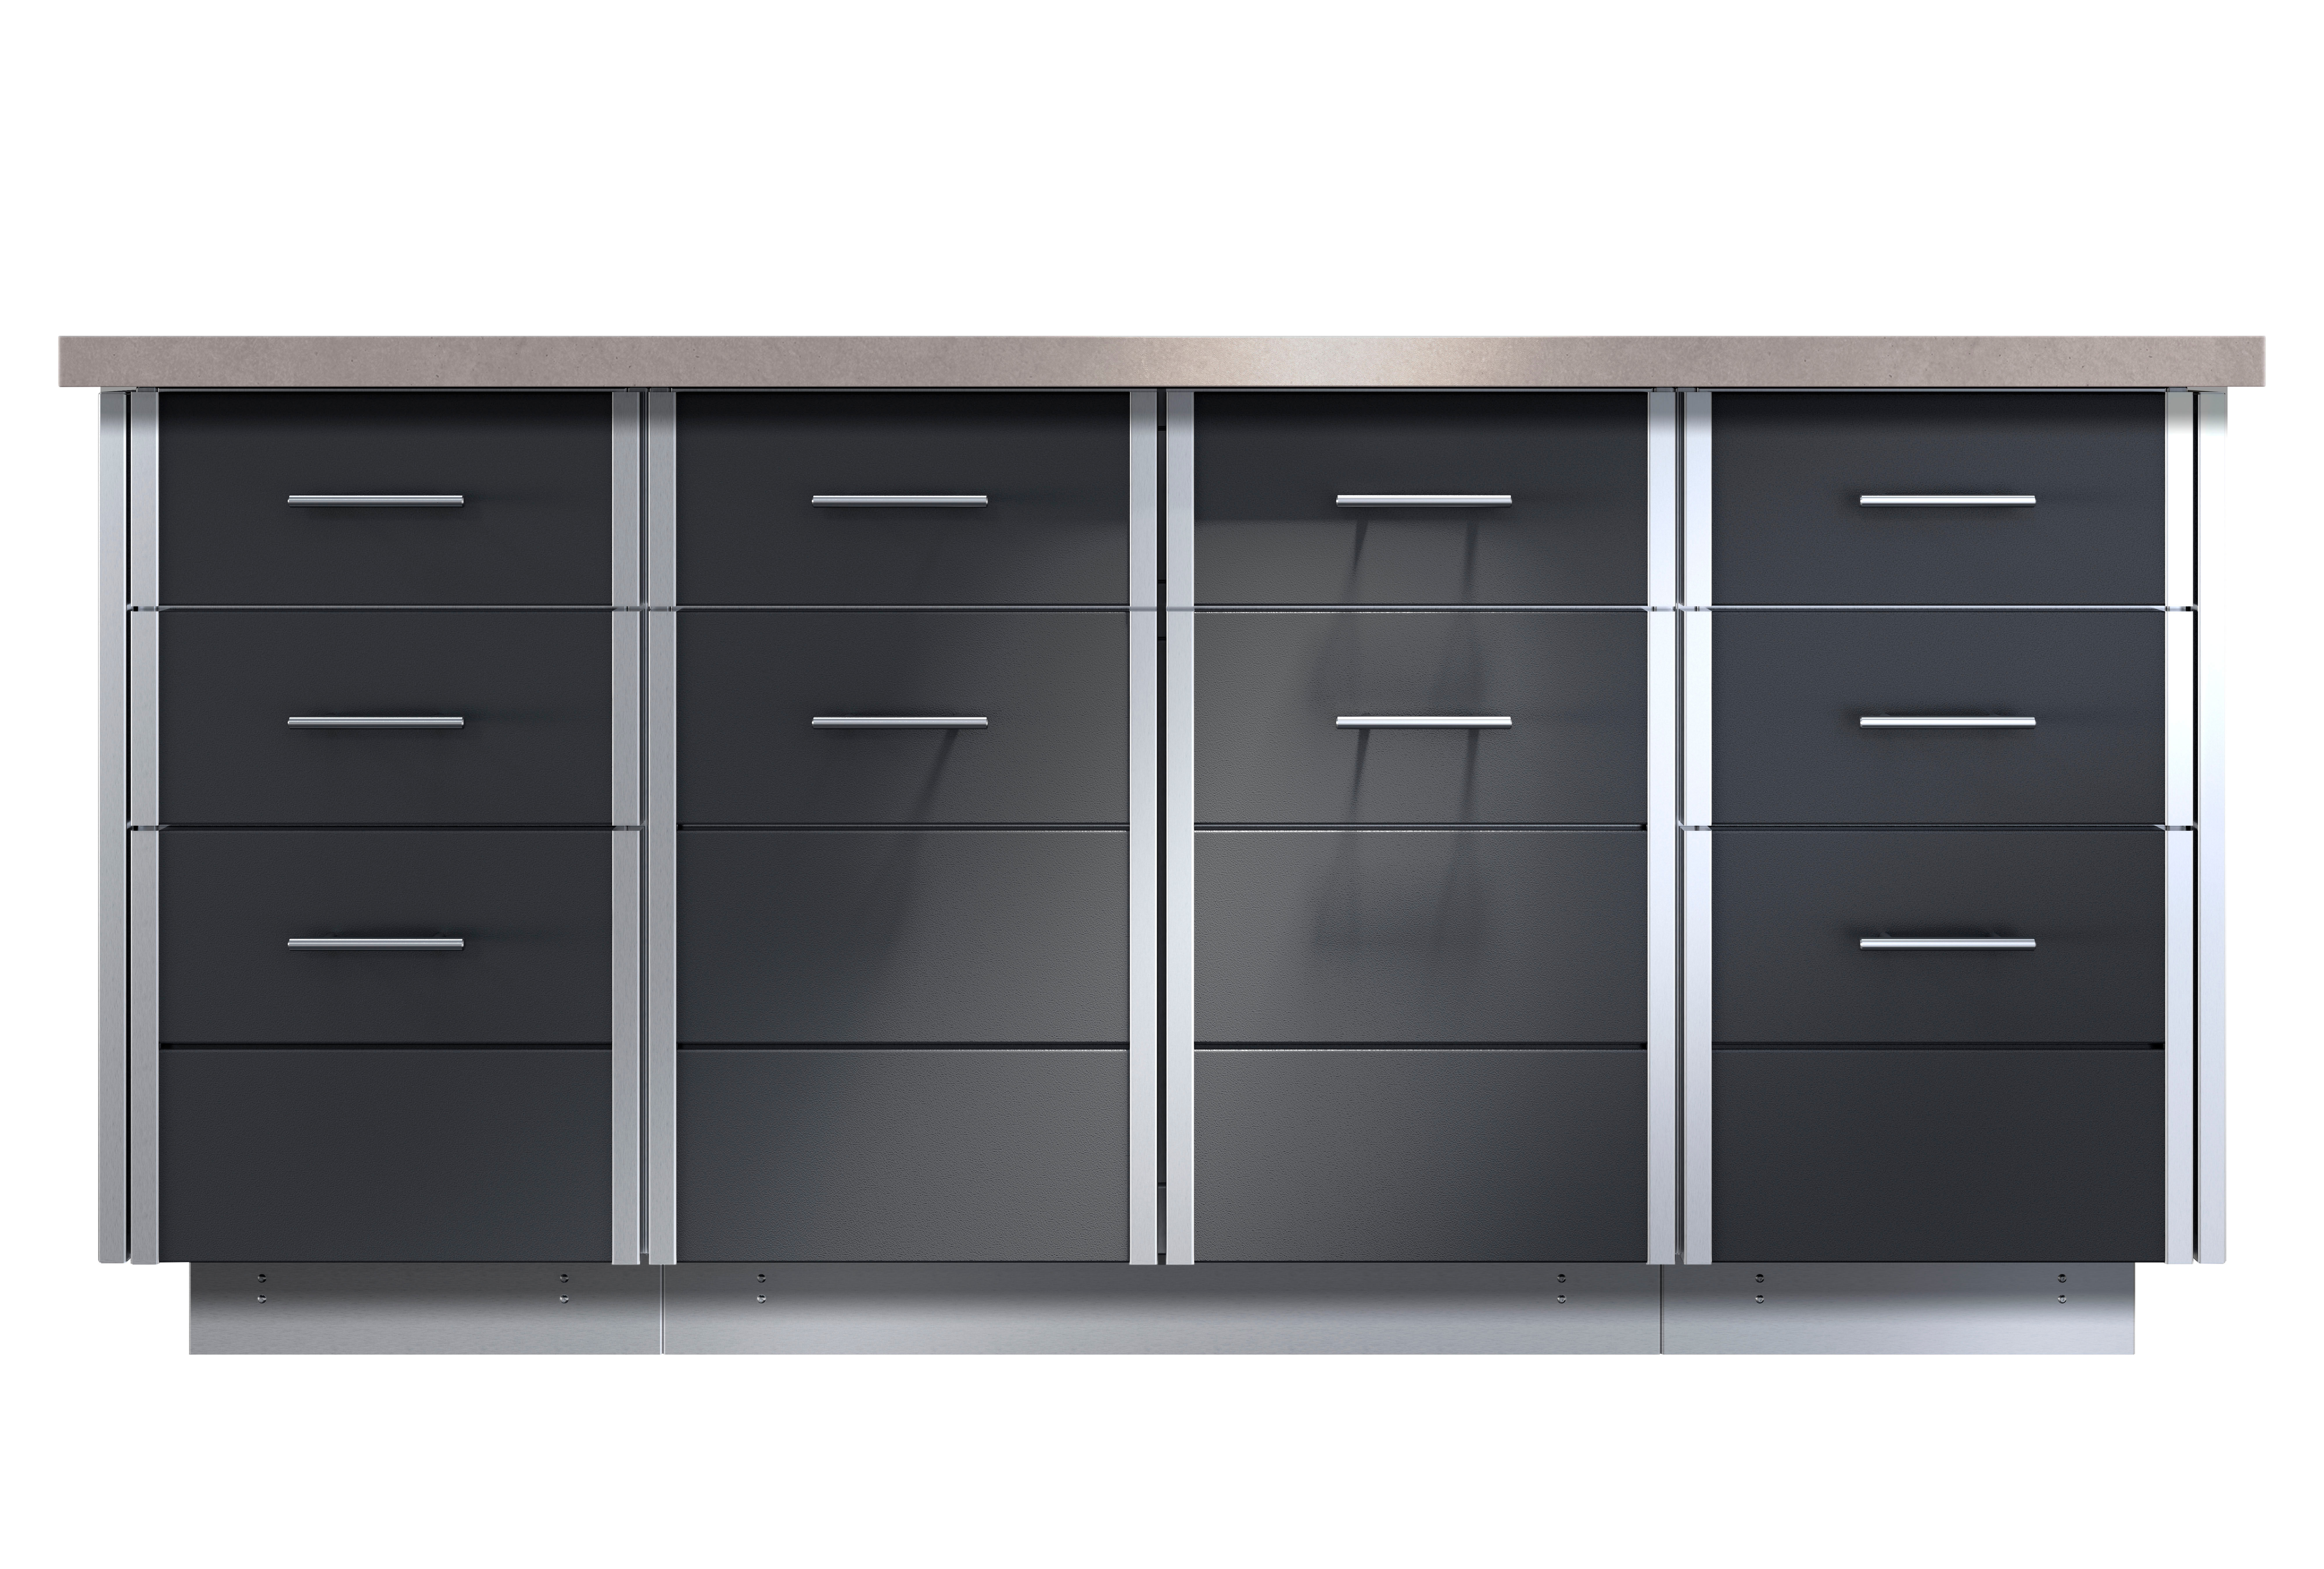 Kalamazoo's new Arcadia Cabinetry Series with powder-coated stainless-steel panels